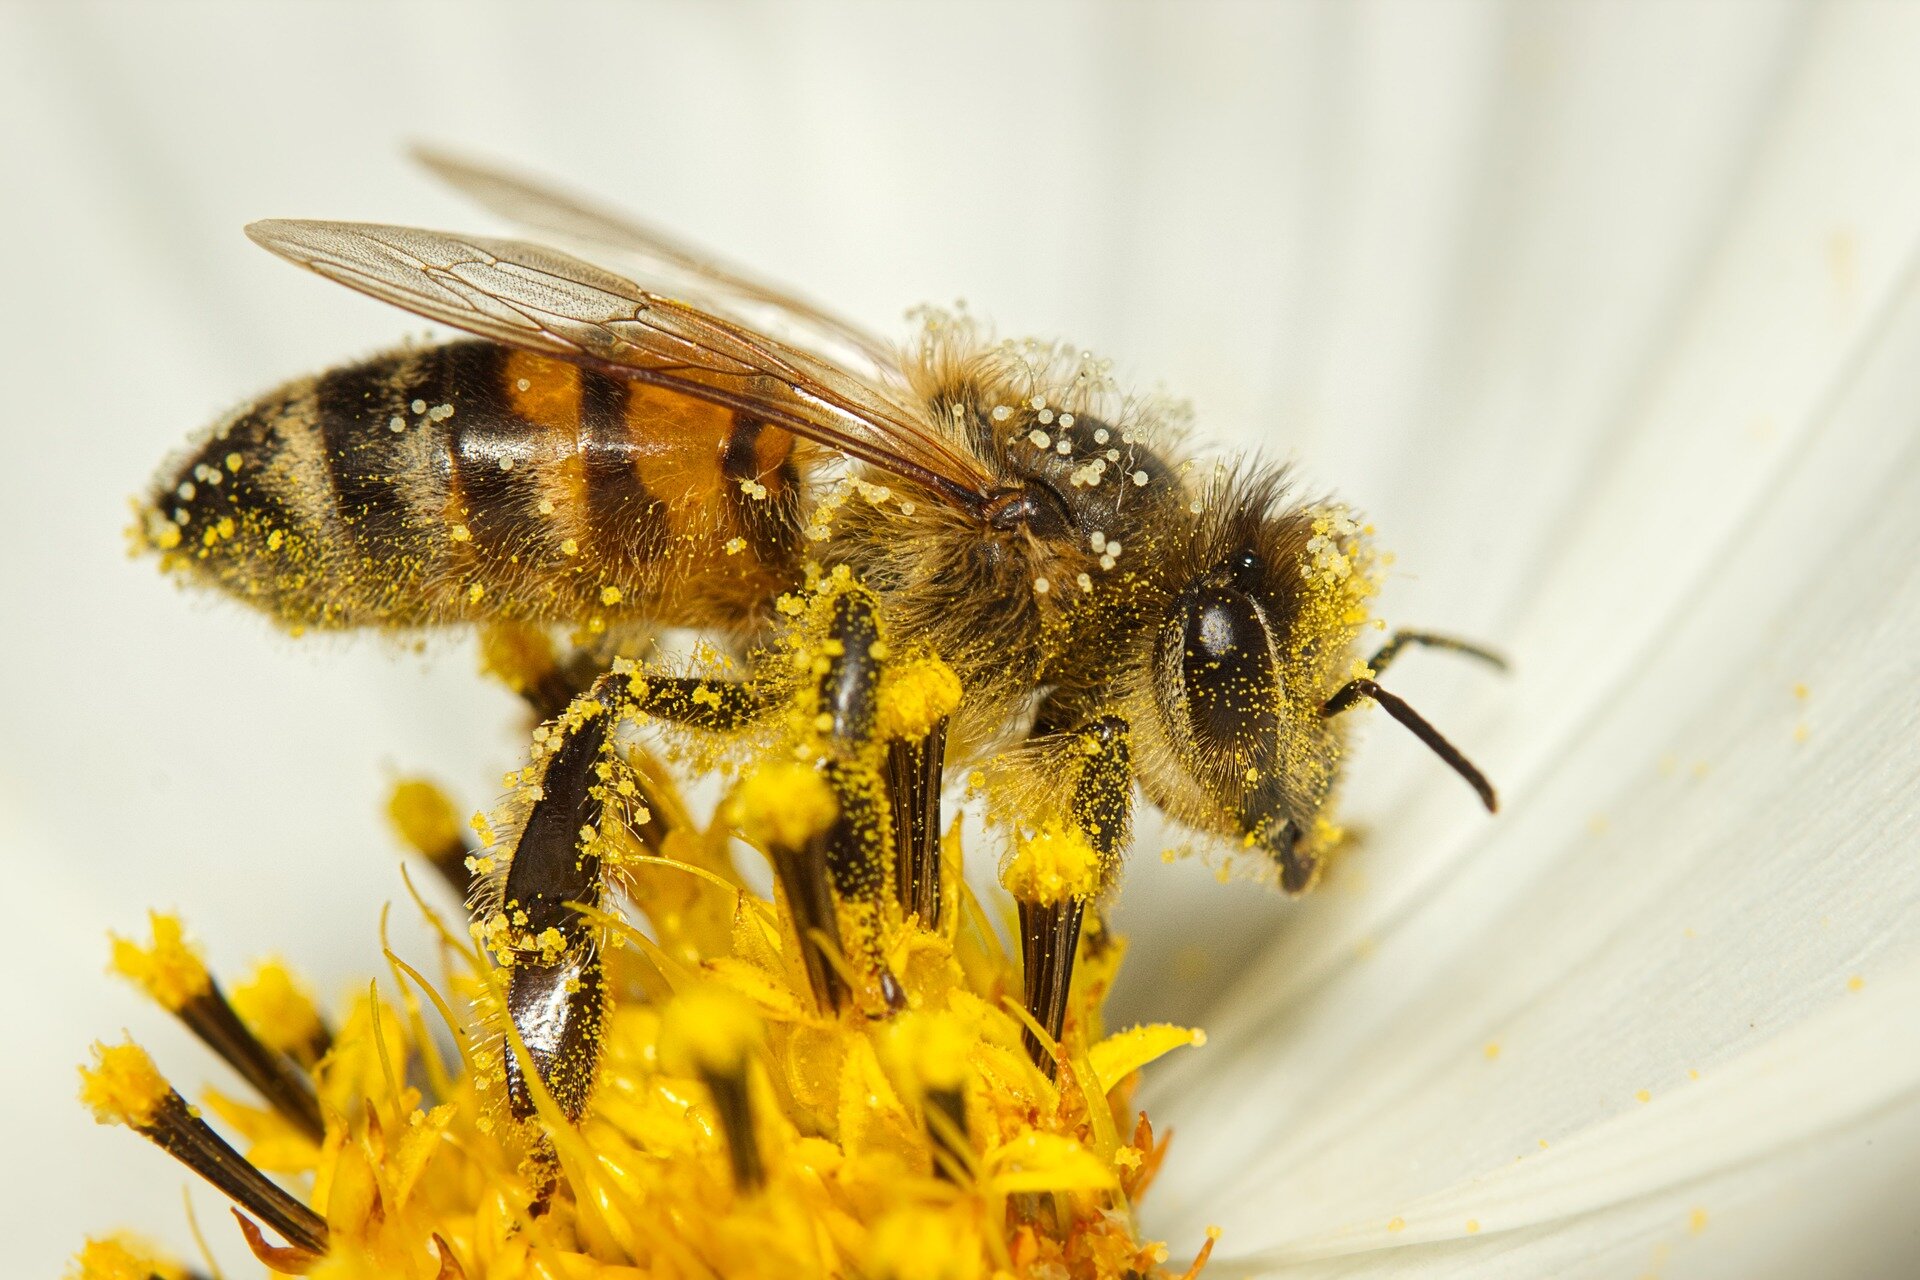 Study finds carrying pollen heats up bumble bees, raises new